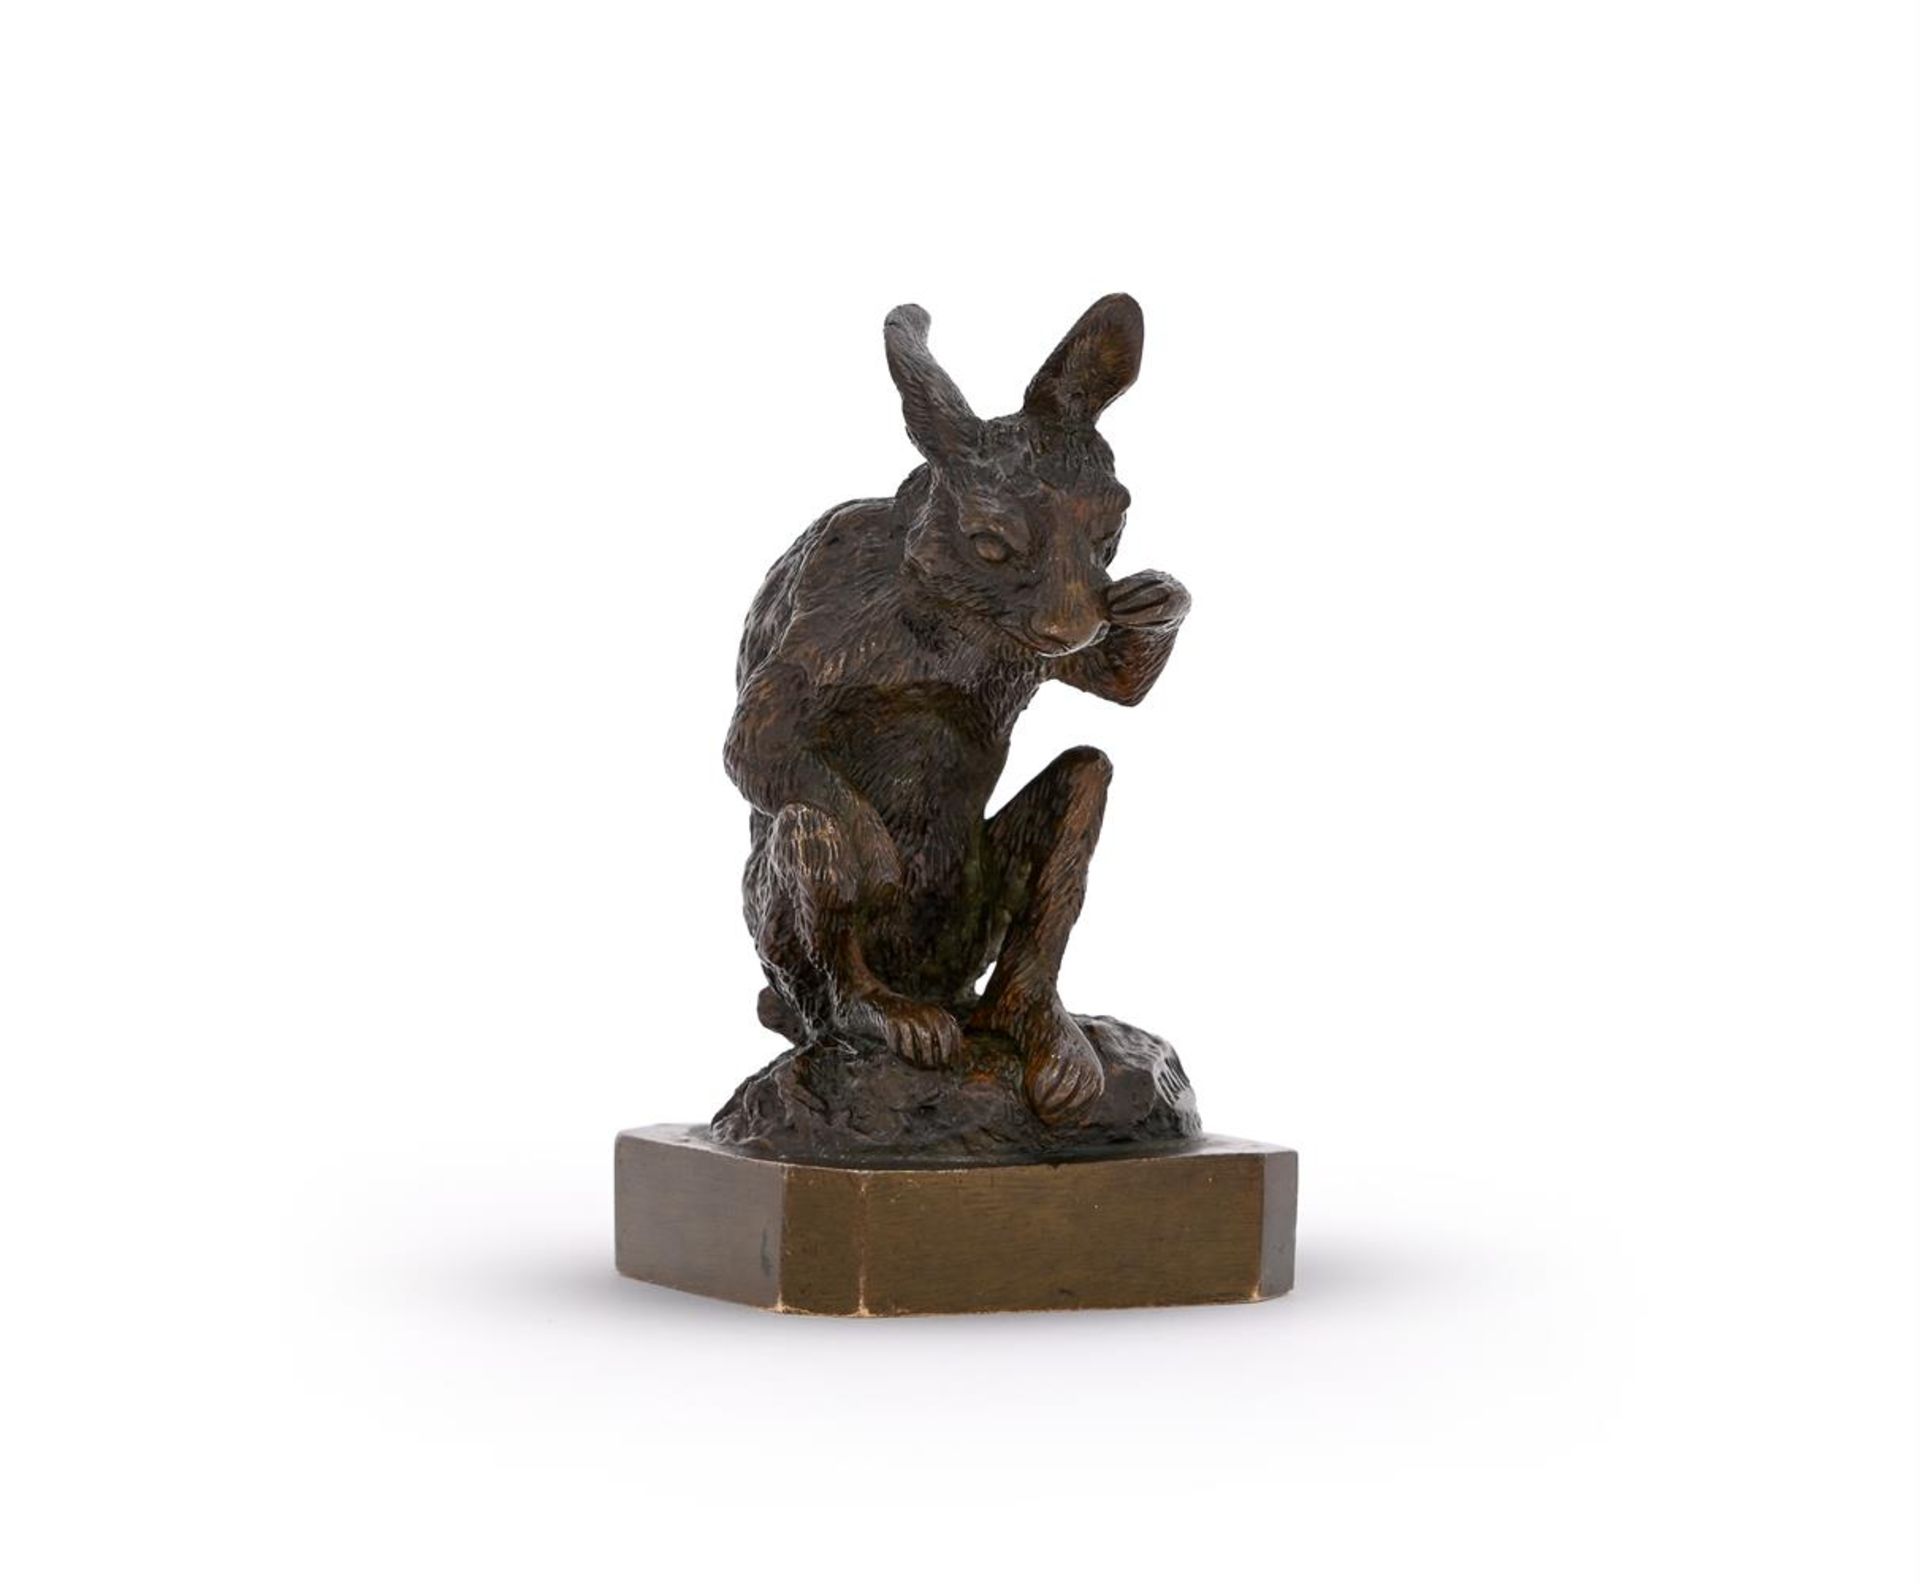 CHRISTOPHE FRATIN (FRENCH, 1801-1864), A BRONZE MODEL OF A HARE GROOMING ITS FACE - Image 2 of 6